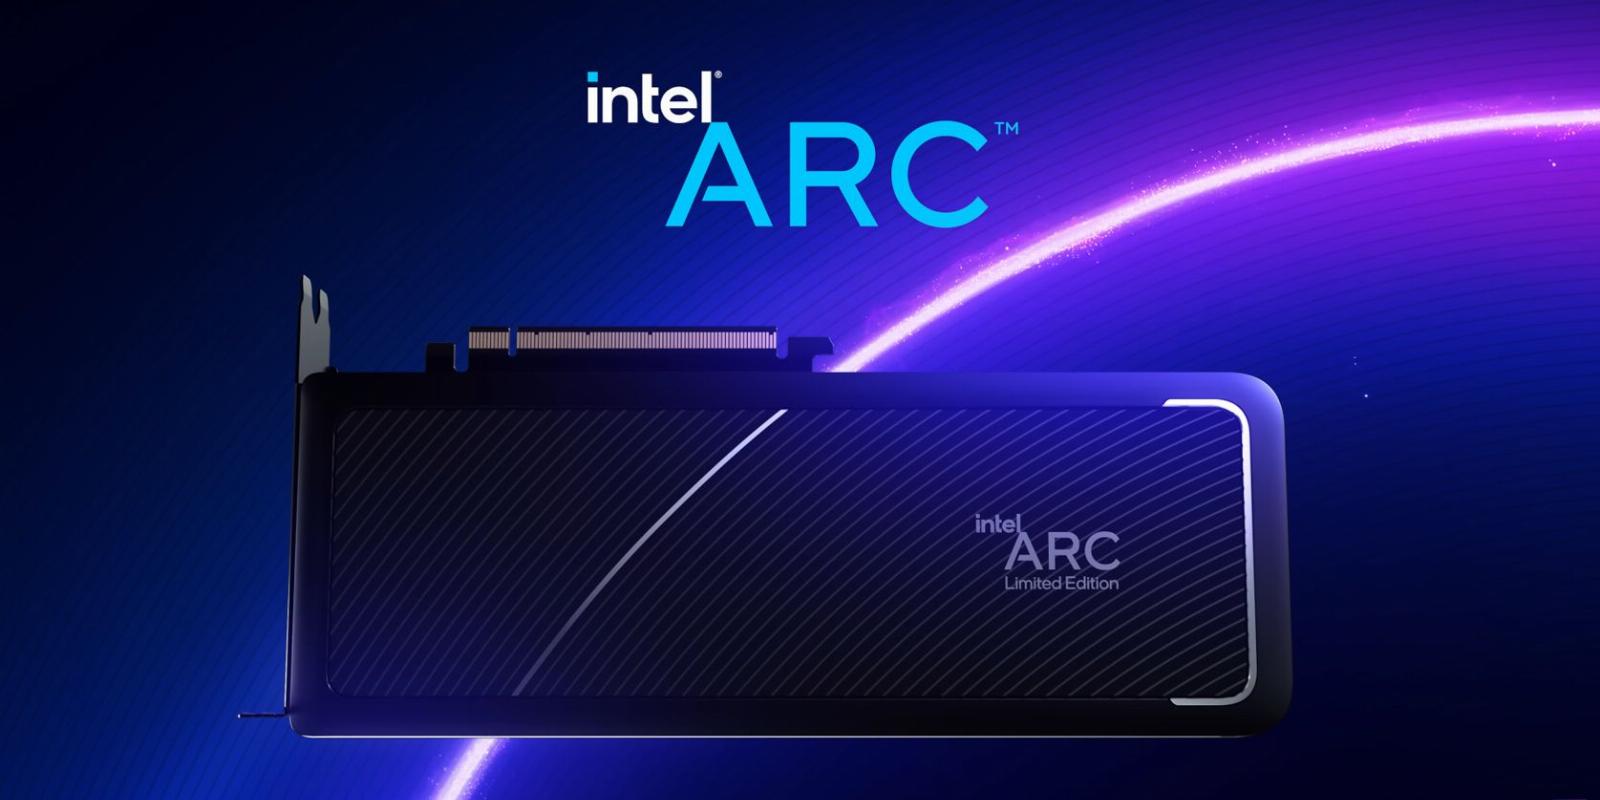 Do Intel Arc GPUs Support Ray Tracing?